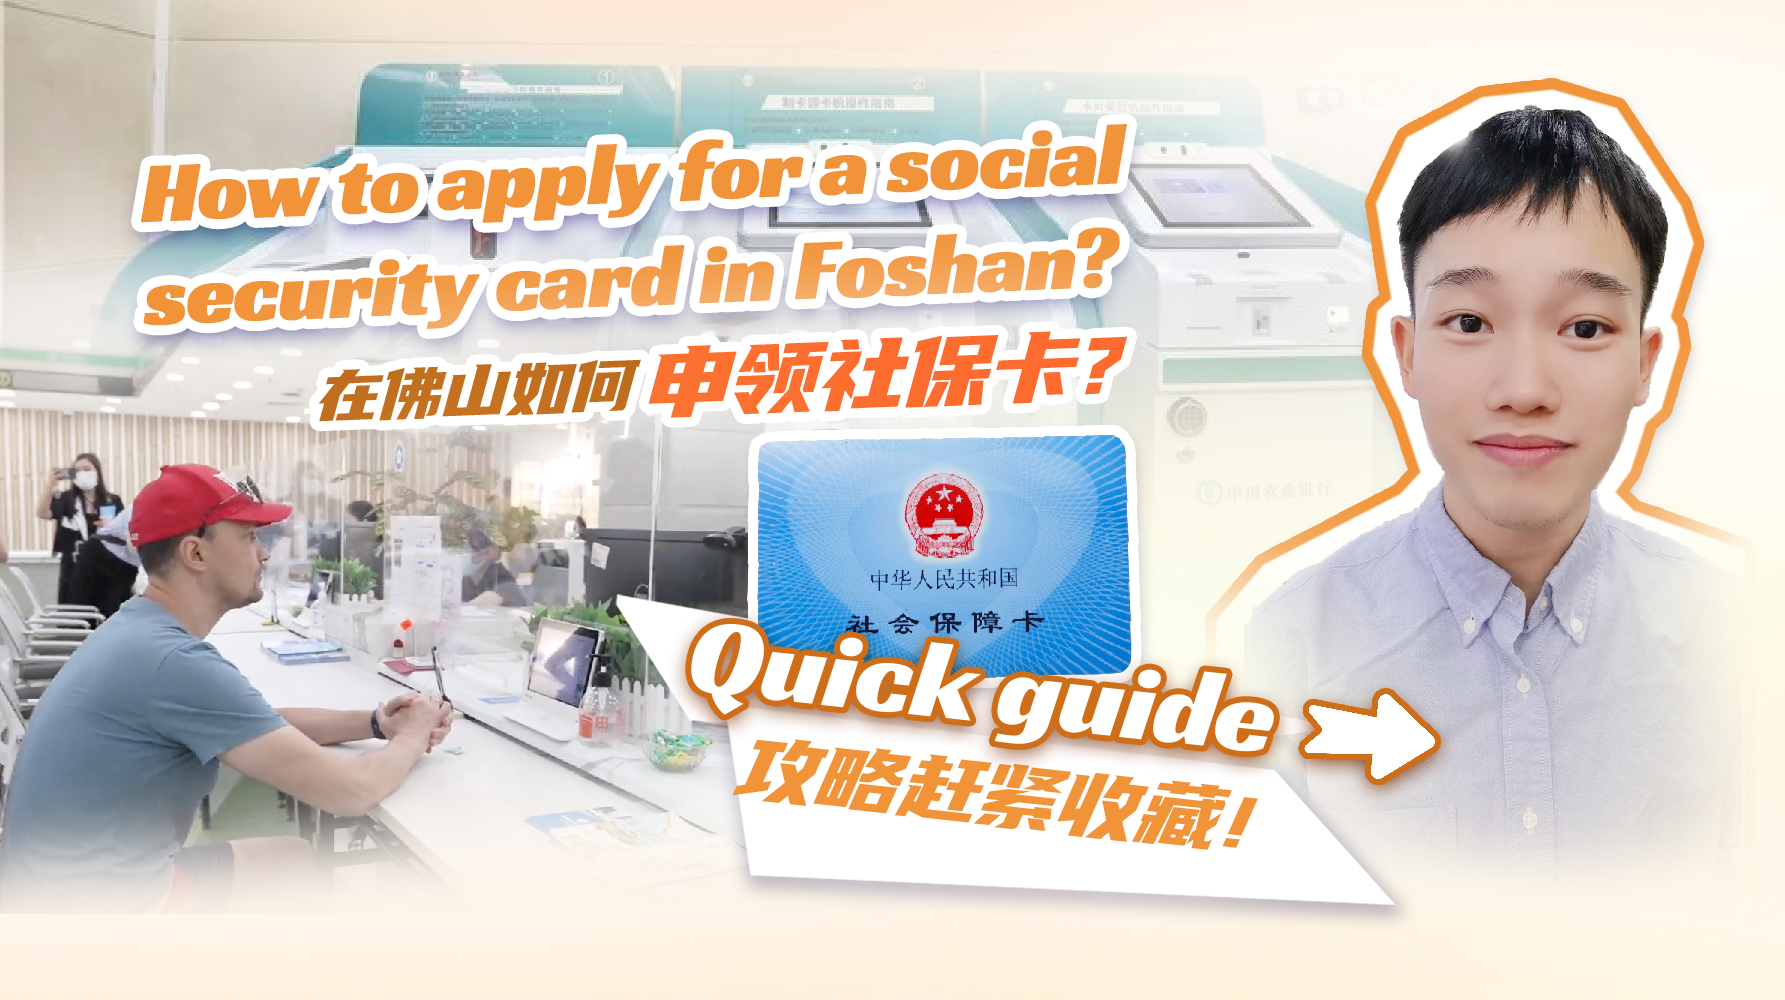 Wonder Q&amp;A | How to apply for social security card in Foshan?